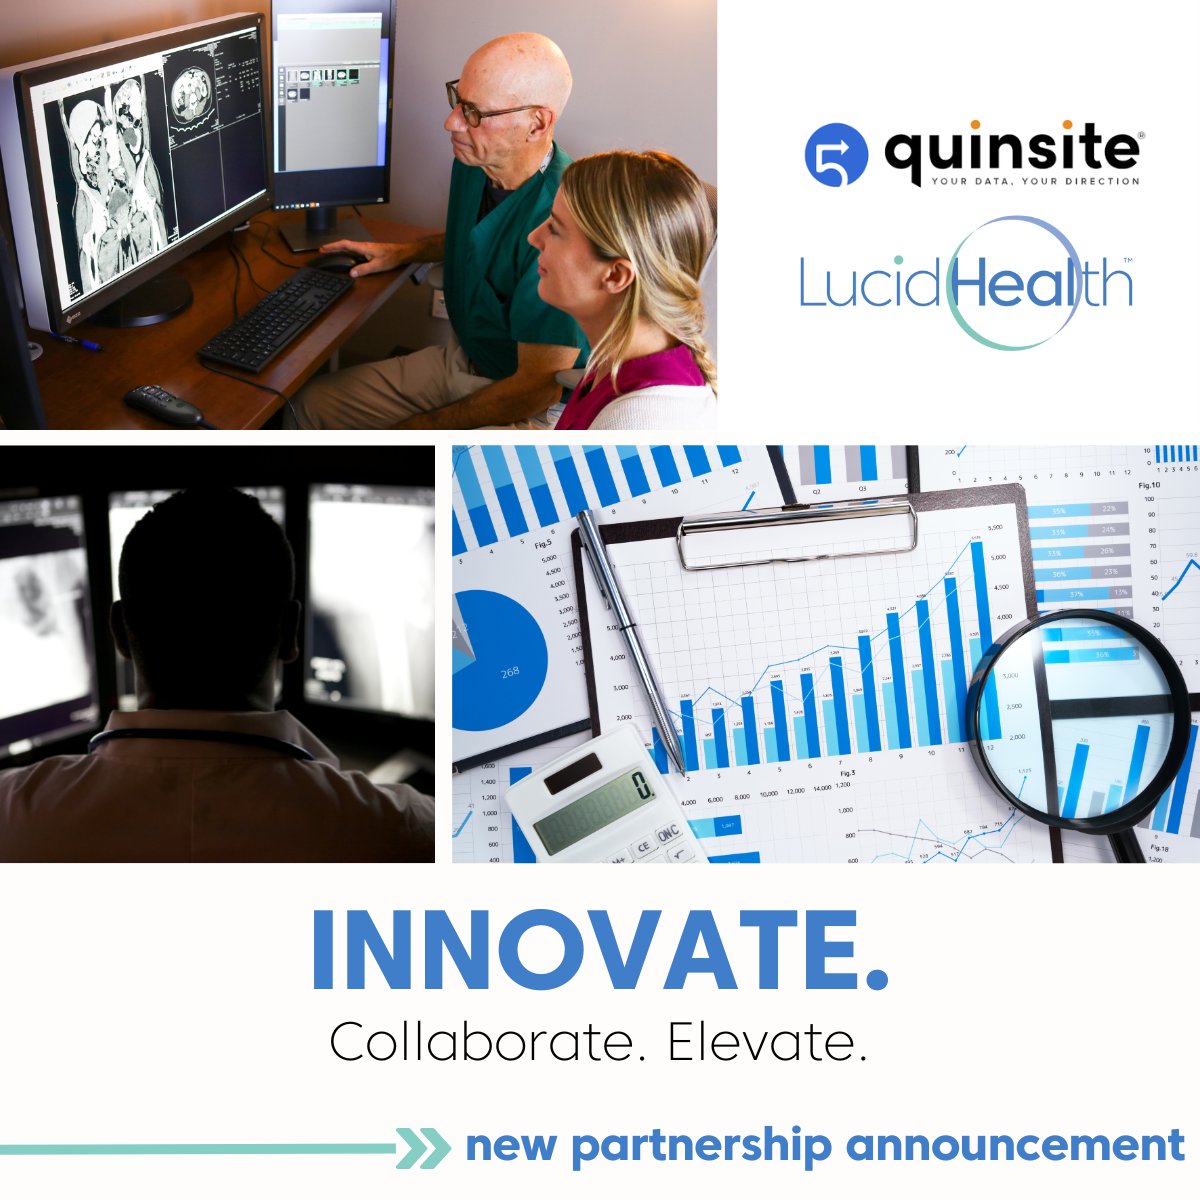 'We're excited to join forces with @quinsite to bring comprehensive and integrated healthcare analytics to our teams,' said Mark Alfonso, MD, CMO of #LucidHealth. Read the announcement: loom.ly/tKb459g #ClearlyTheFuture #Radiology #RadLeaders #AI #PoweredByLucidHealth